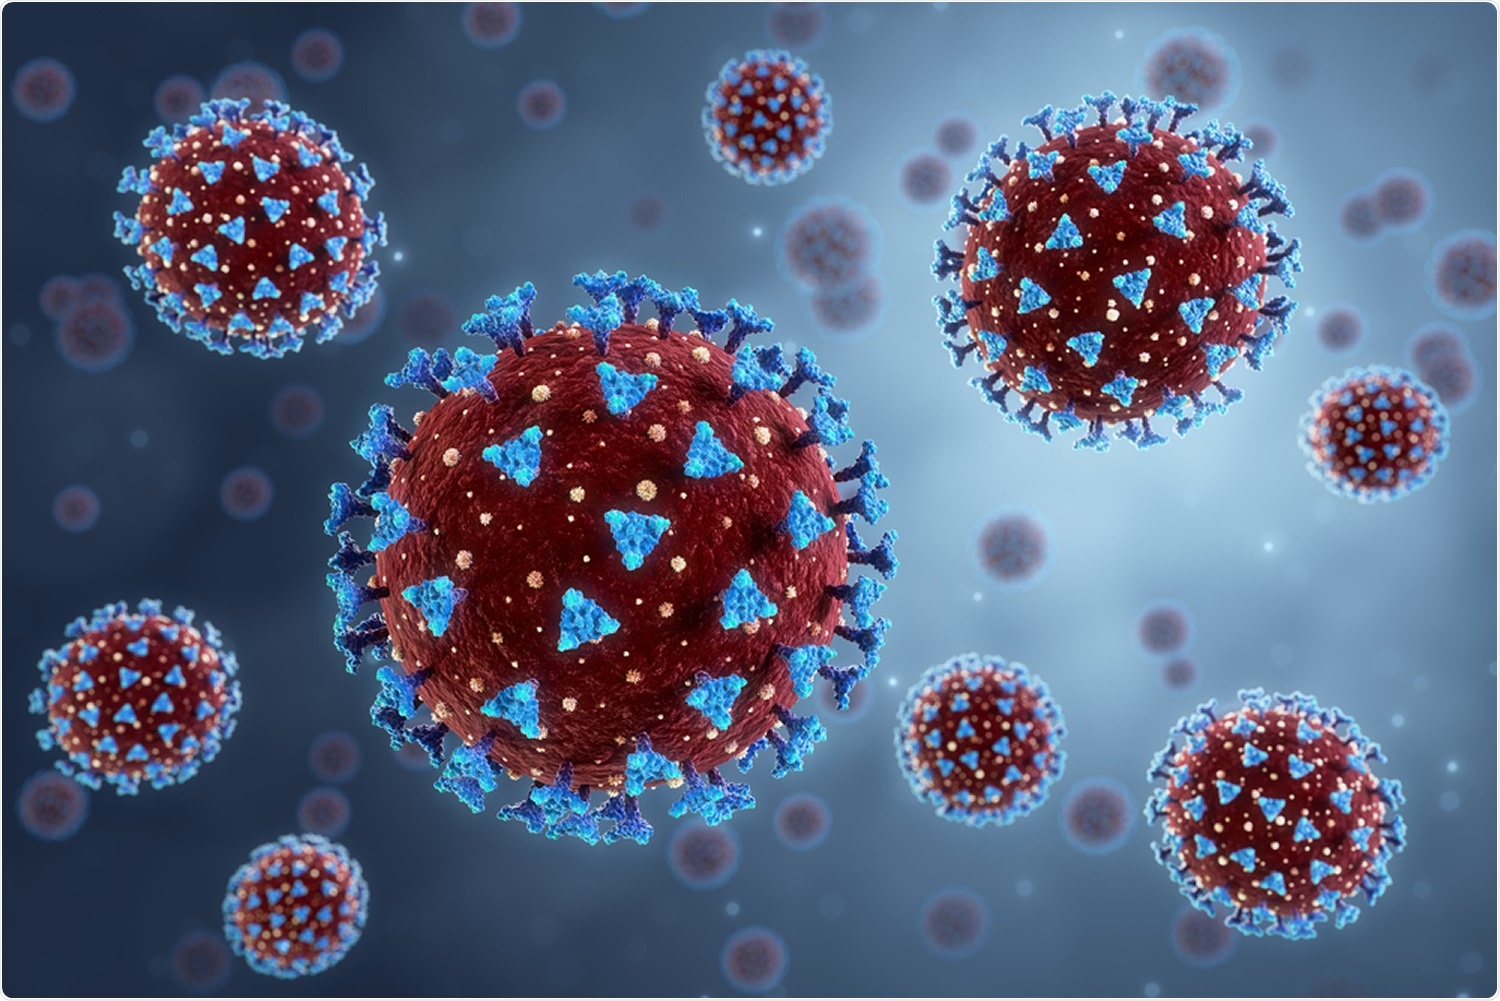 Study: Infectious SARS-CoV-2 is emitted in aerosols. Image Credit: JBArt / Shutterstock